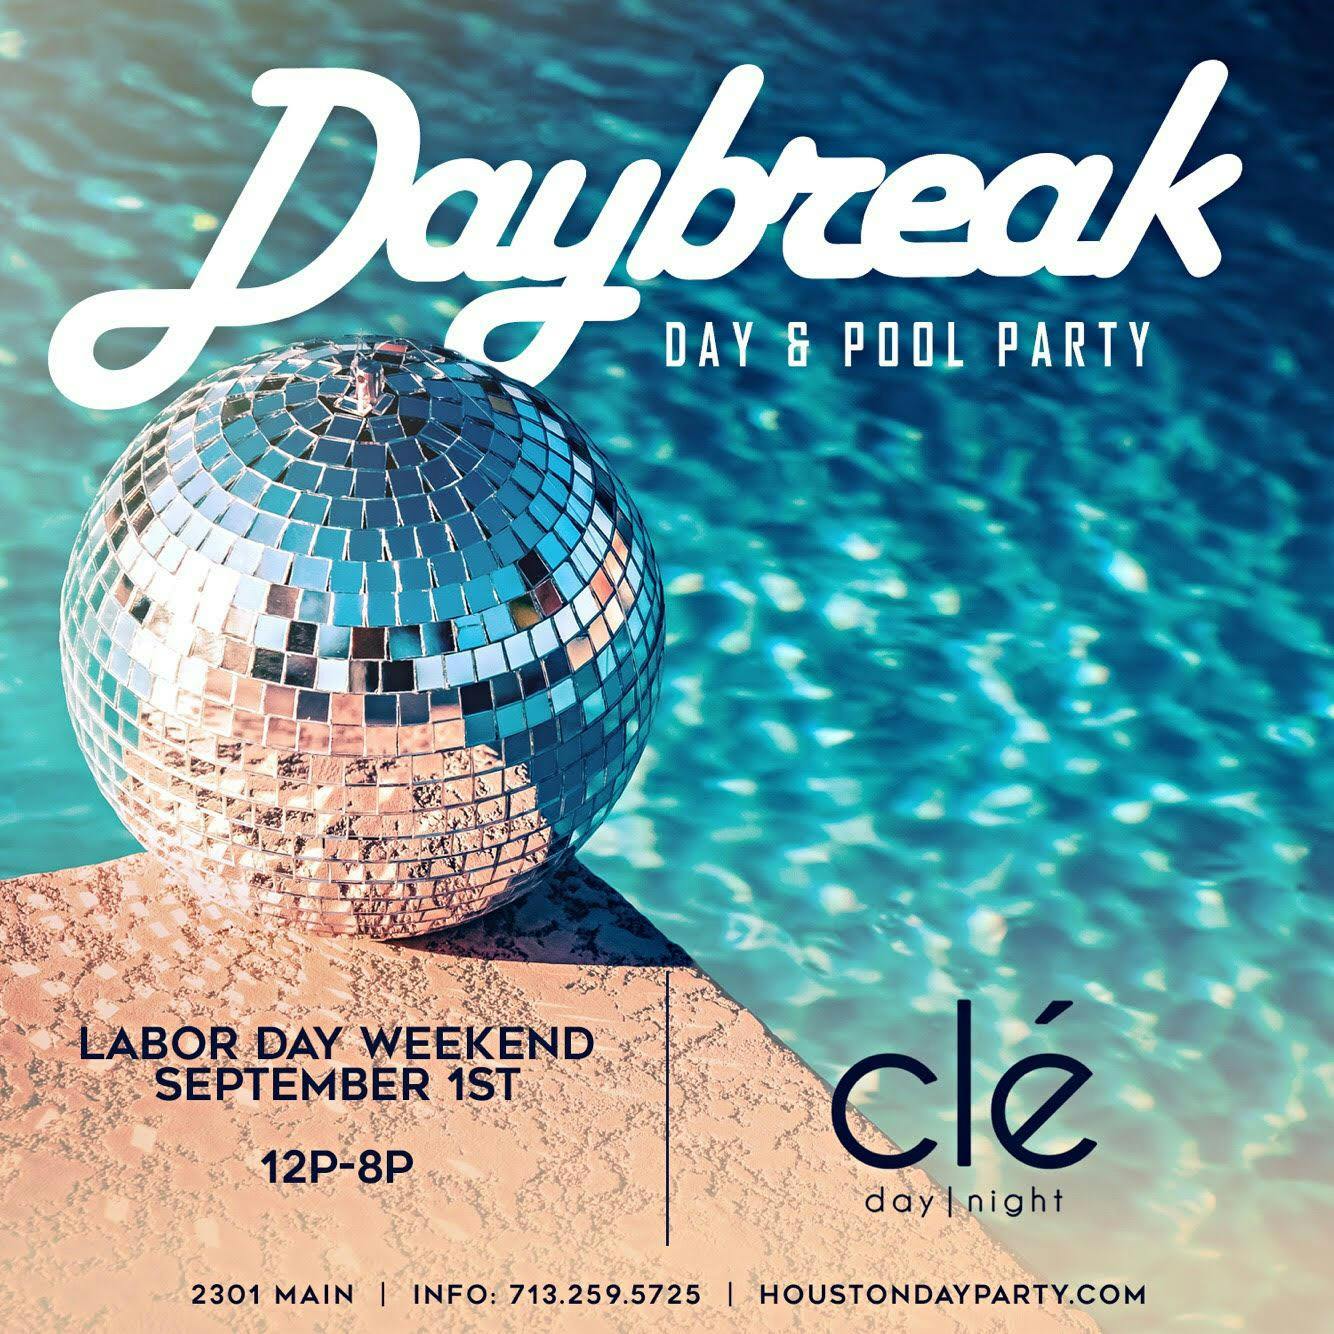 DAYBREAK™ EASTER WKND/ SaturDAY Dayparty / Clé